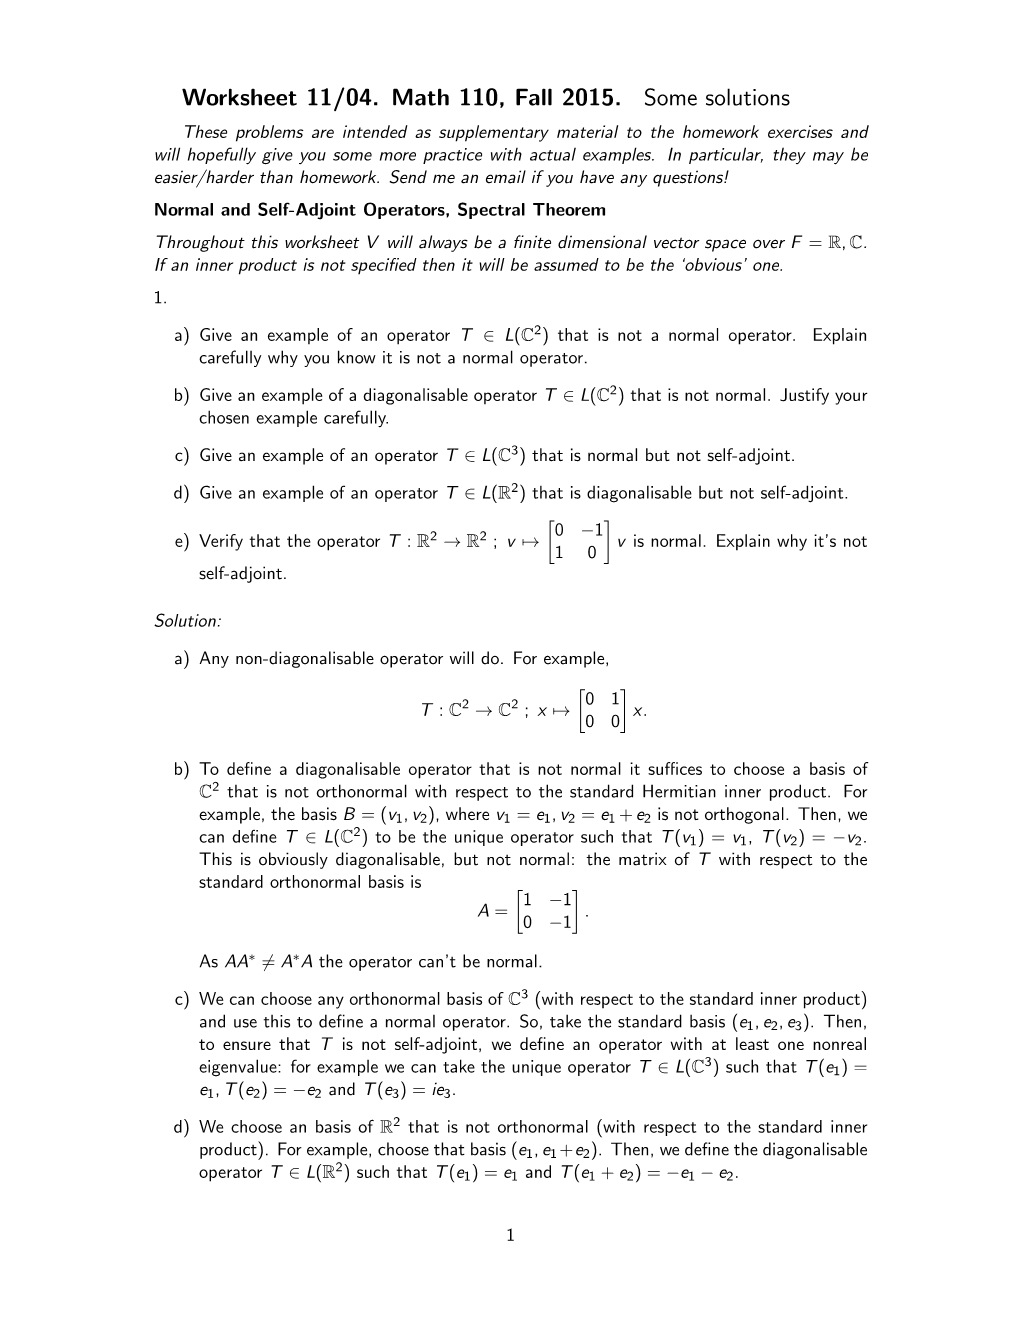 Worksheet 11/04. Math 110, Fall 2015. Some Solutions